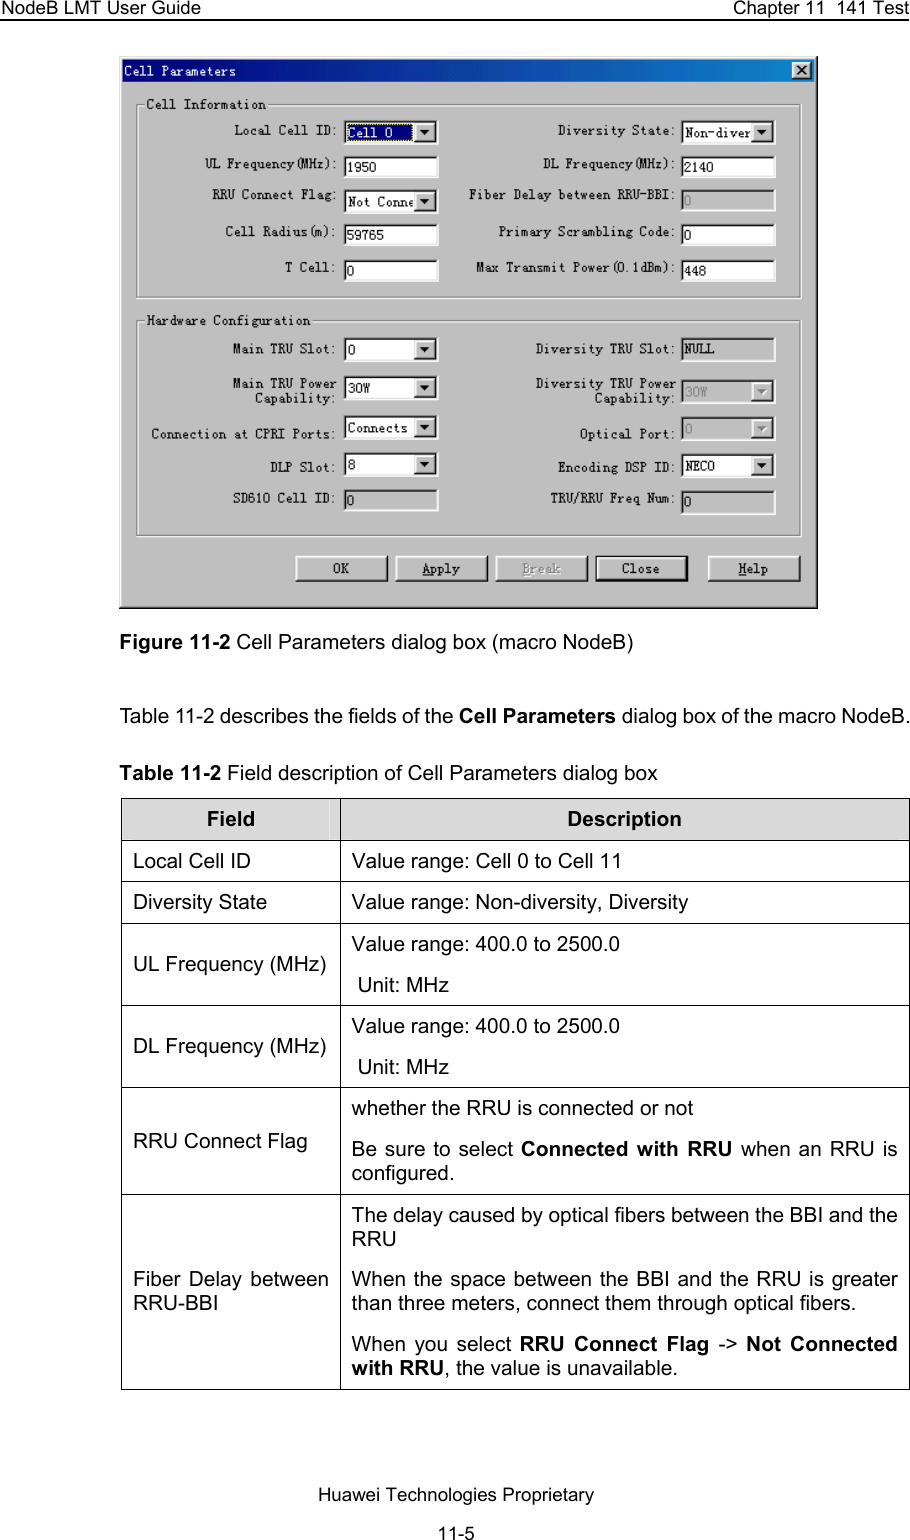 NodeB LMT User Guide  Chapter 11  141 Test  Figure 11-2 Cell Parameters dialog box (macro NodeB) Table 11-2 describes the fields of the Cell Parameters dialog box of the macro NodeB. Table 11-2 Field description of Cell Parameters dialog box Field  Description  Local Cell ID  Value range: Cell 0 to Cell 11 Diversity State  Value range: Non-diversity, Diversity UL Frequency (MHz) Value range: 400.0 to 2500.0  Unit: MHz DL Frequency (MHz) Value range: 400.0 to 2500.0  Unit: MHz RRU Connect Flag whether the RRU is connected or not Be sure to select Connected with RRU when an RRU is configured.  Fiber Delay between RRU-BBI The delay caused by optical fibers between the BBI and the RRU When the space between the BBI and the RRU is greater than three meters, connect them through optical fibers.  When you select RRU Connect Flag -&gt;  Not Connected with RRU, the value is unavailable.  Huawei Technologies Proprietary 11-5 